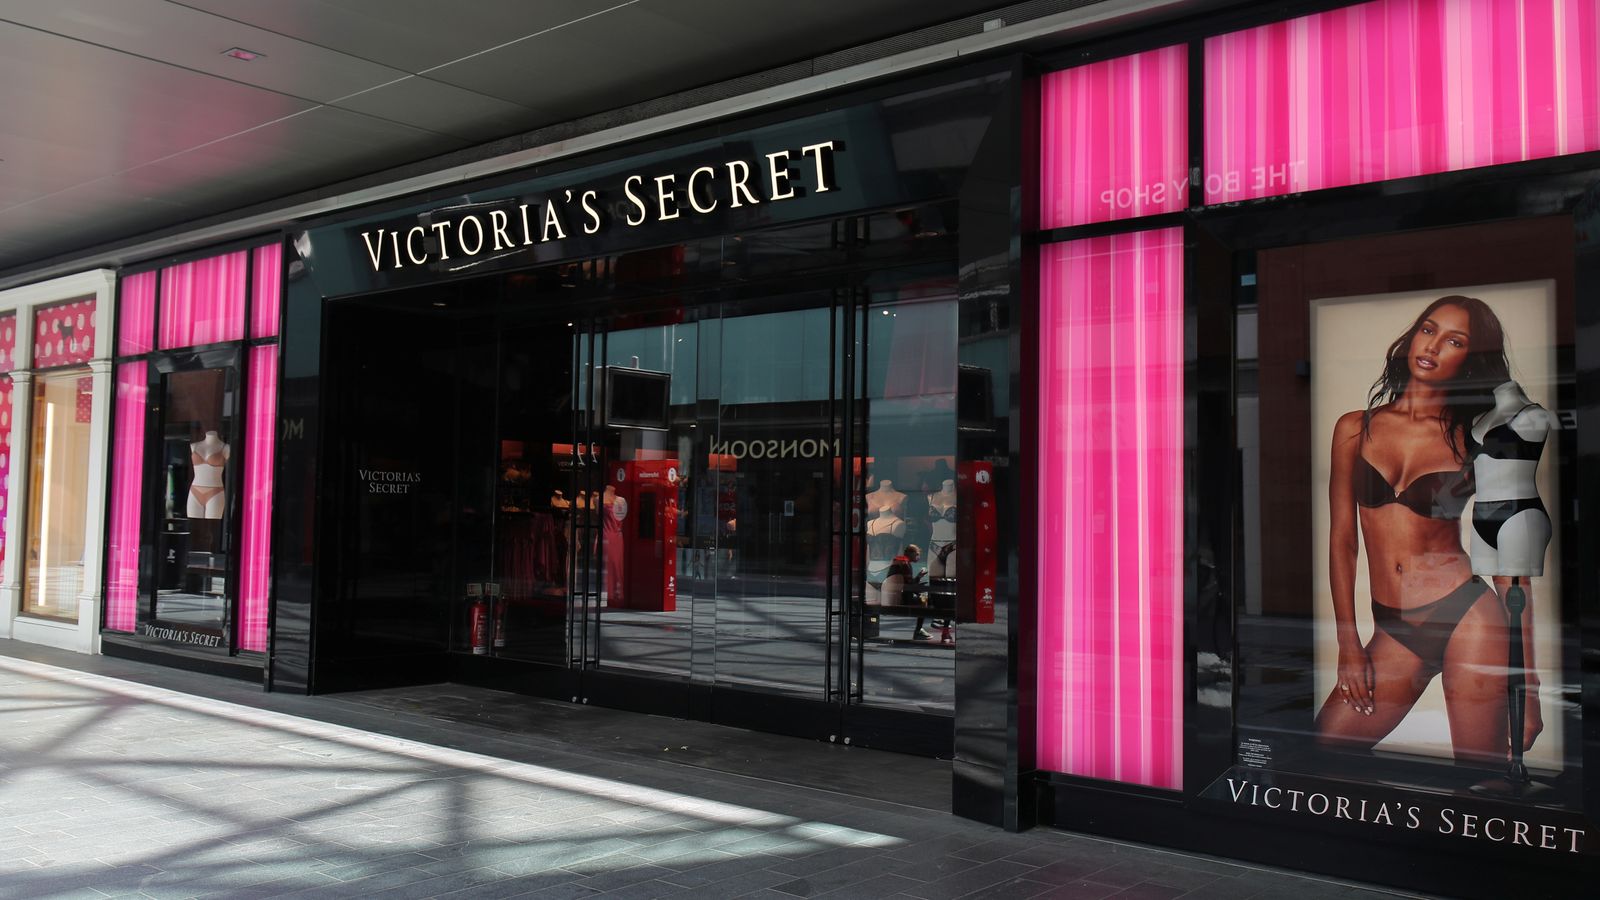 Victoria's Secret to open three new stores in the UK at Manchester